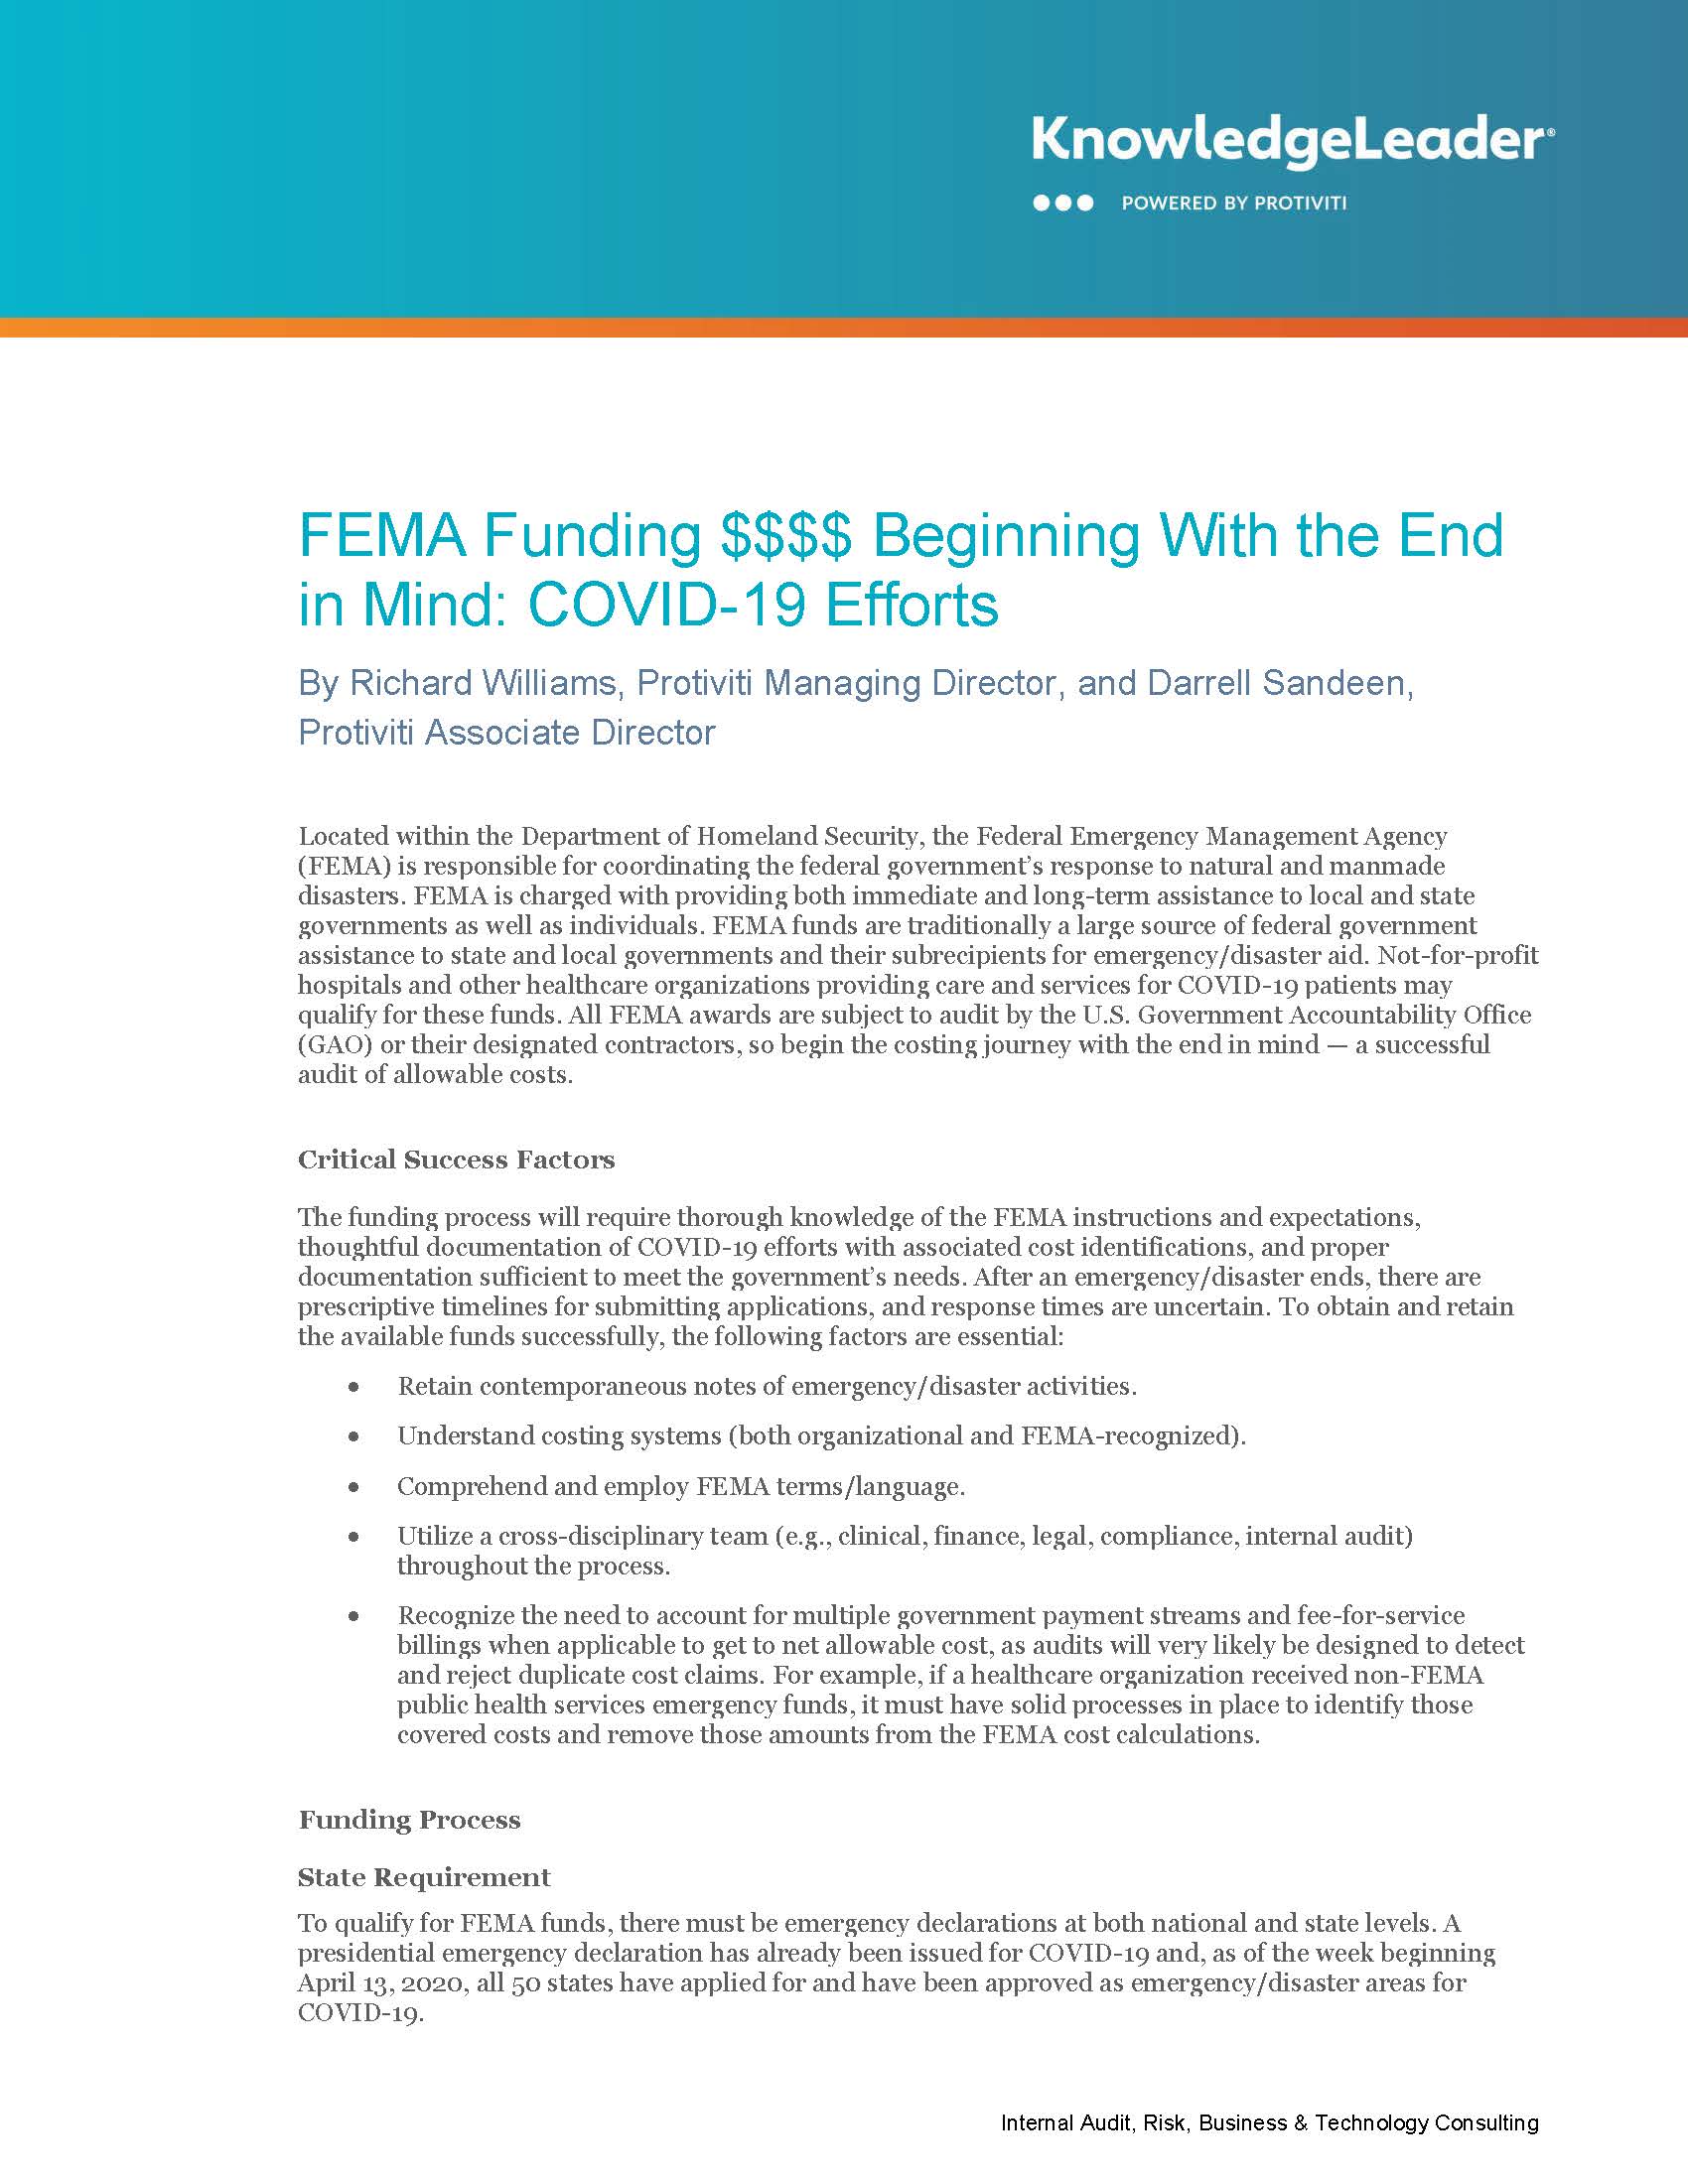 Screenshot of the first page of FEMA Funding $$$$ Beginning With the End in Mind: COVID-19 Efforts